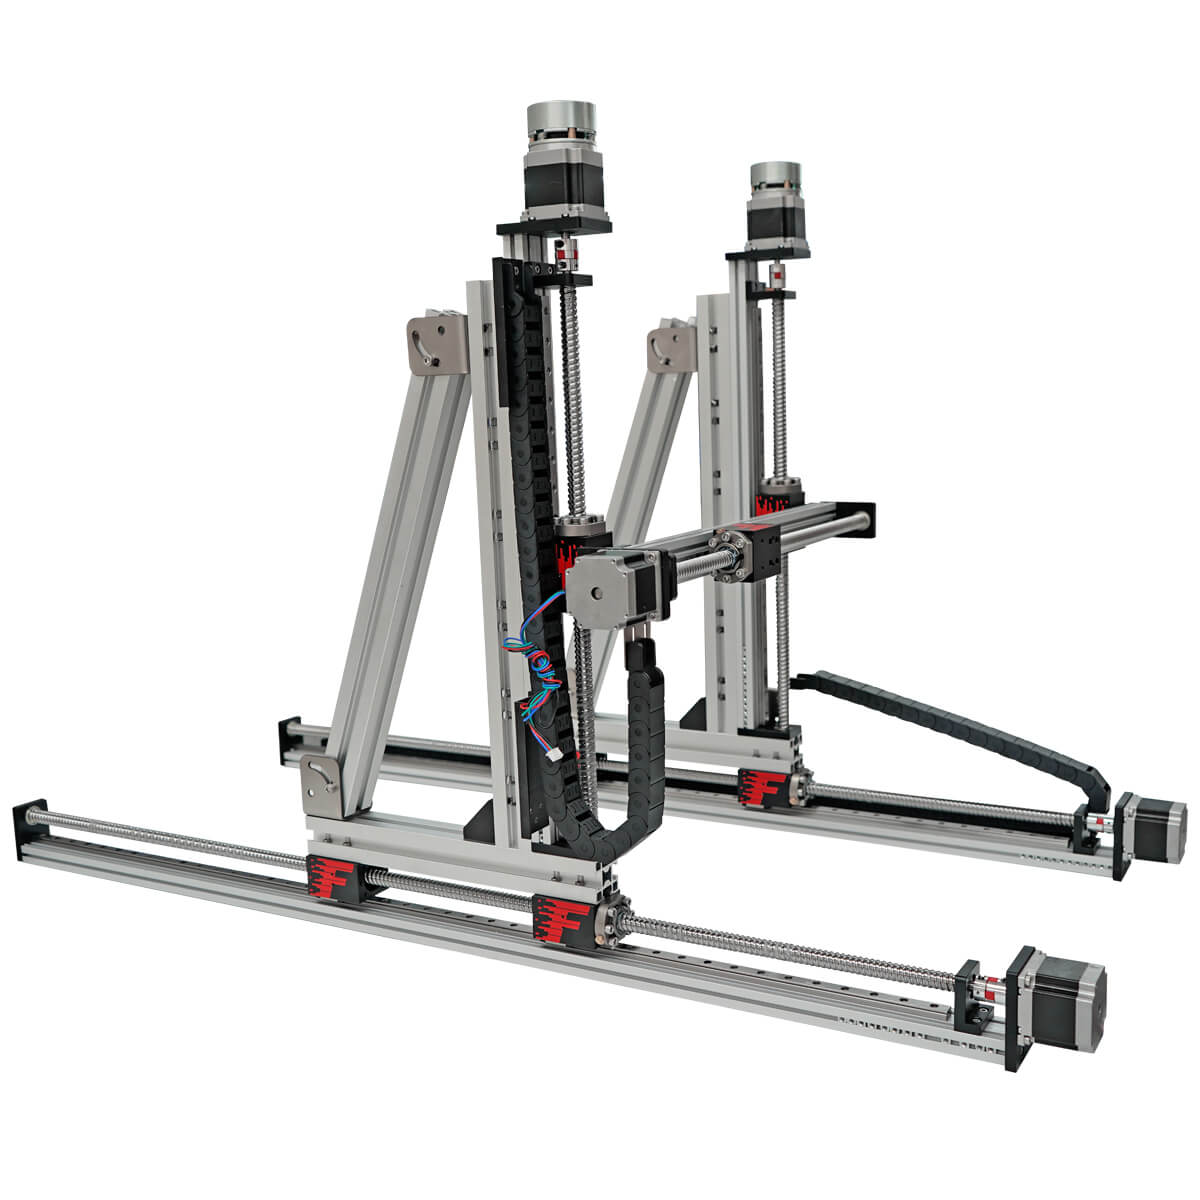 Double Z Axis Linear Table Ball Screw Gantry Sy...